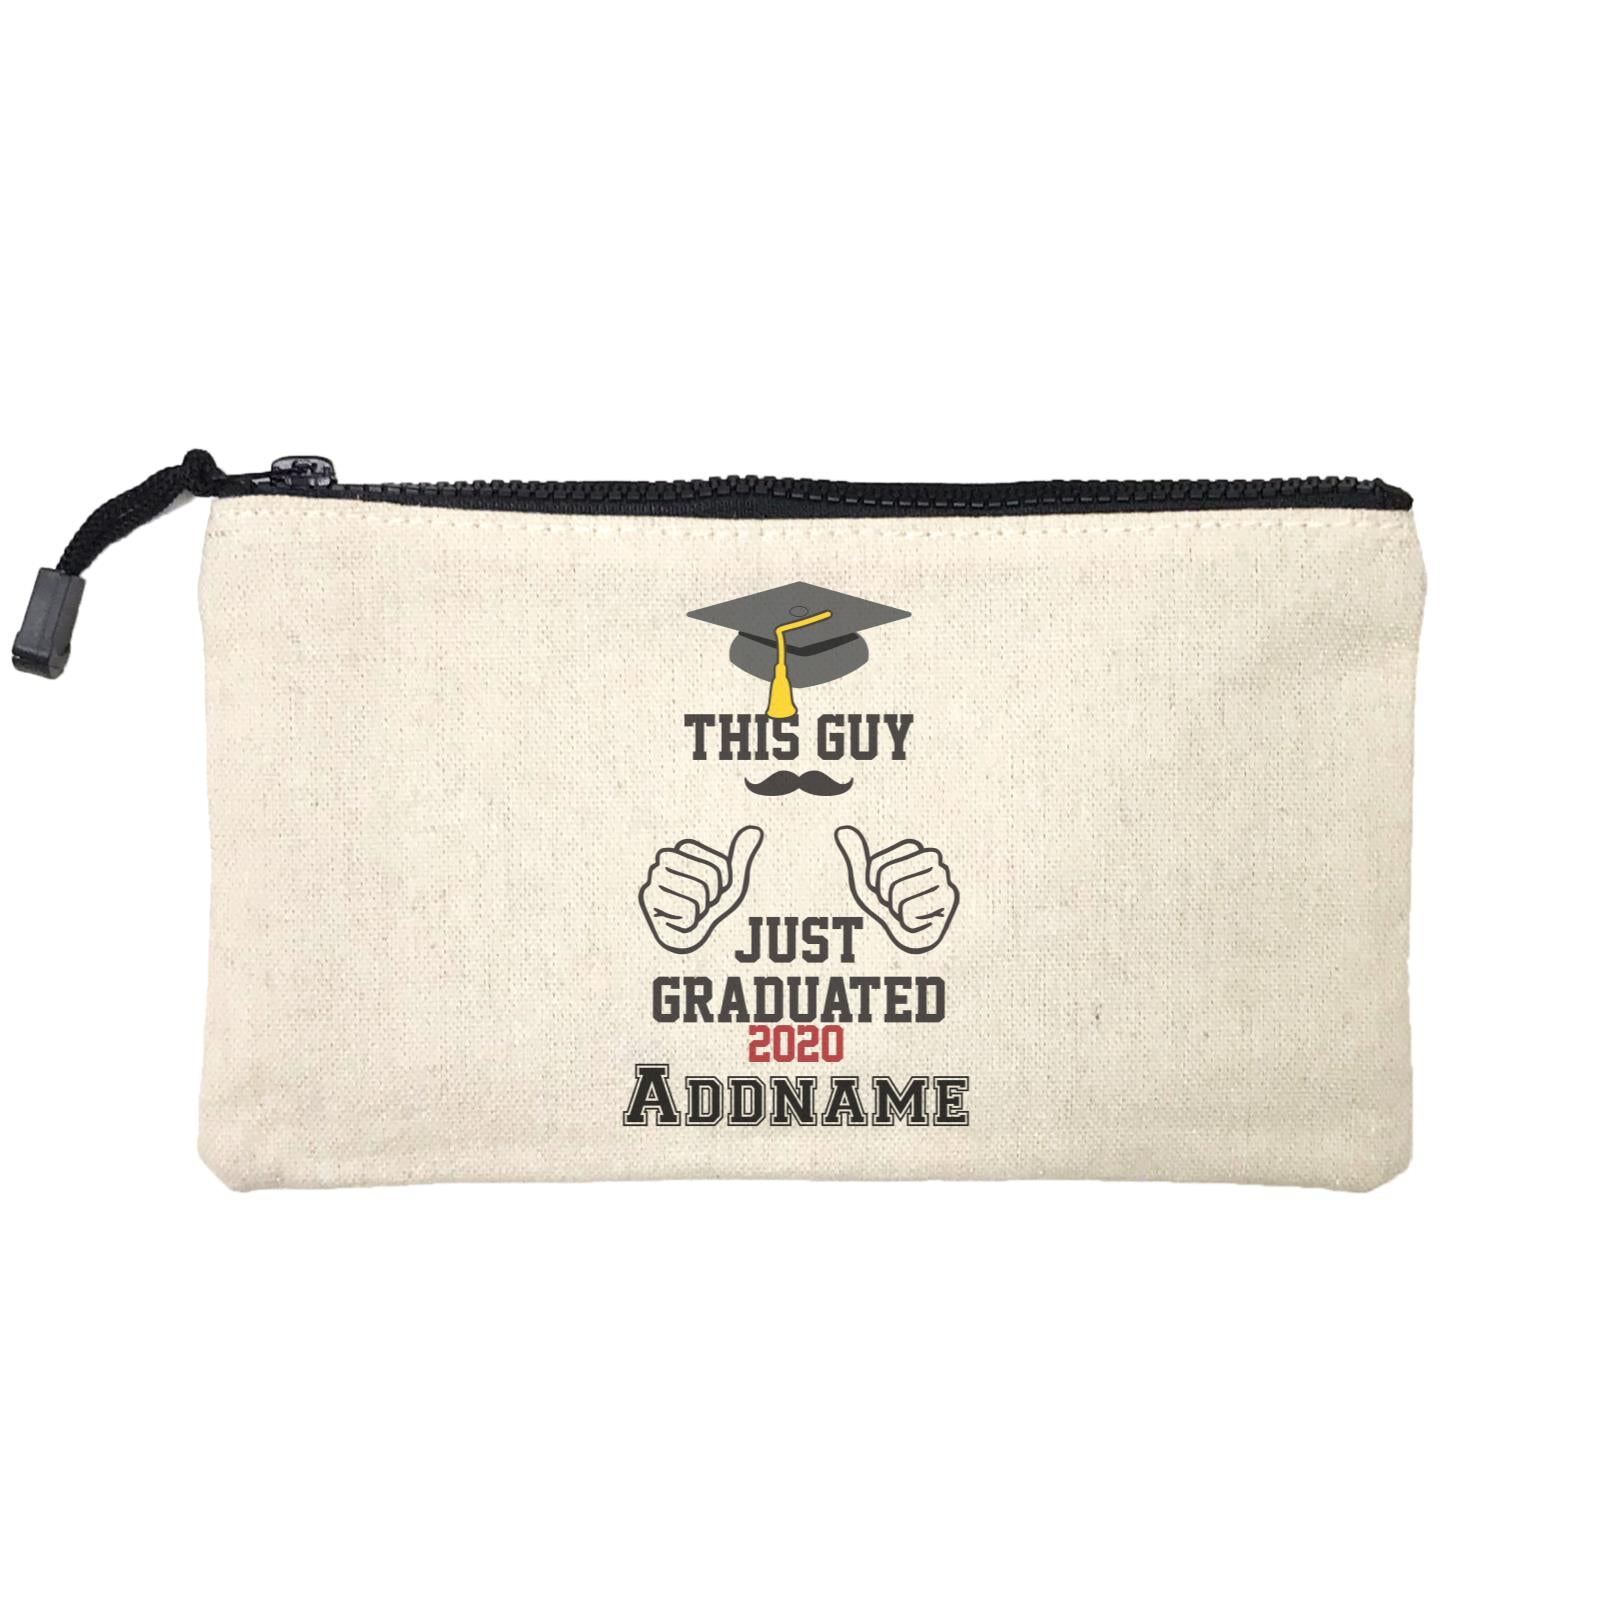 Graduation Series This Guy Just Graduated Mini Accessories Stationery Pouch